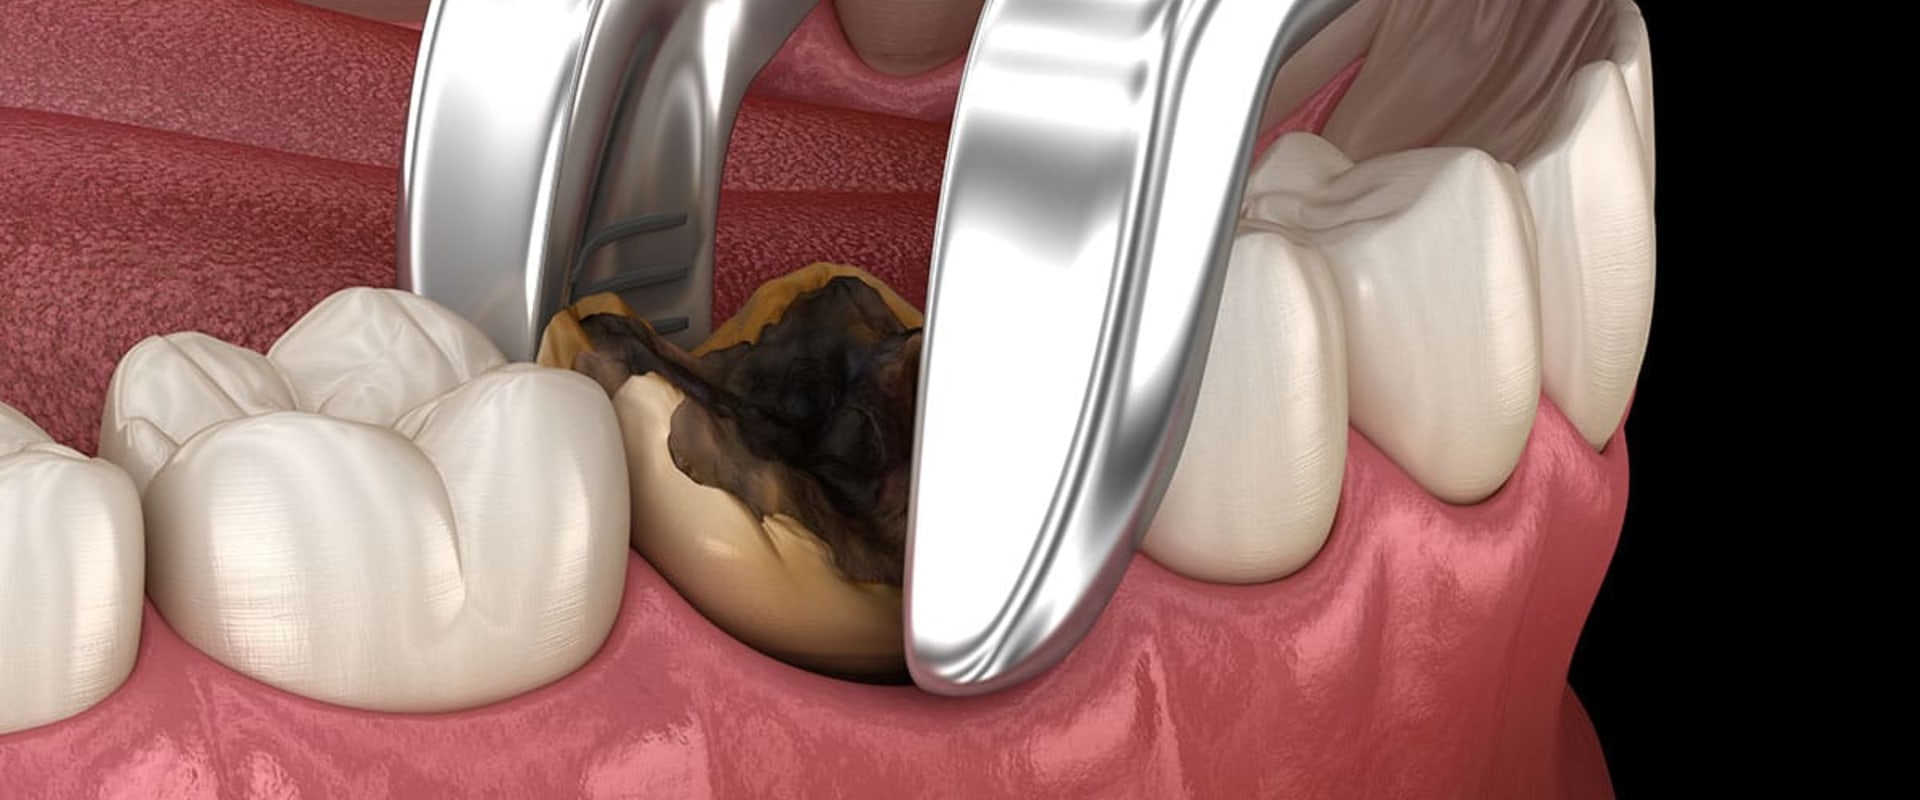 What is the most complicated dental procedure?